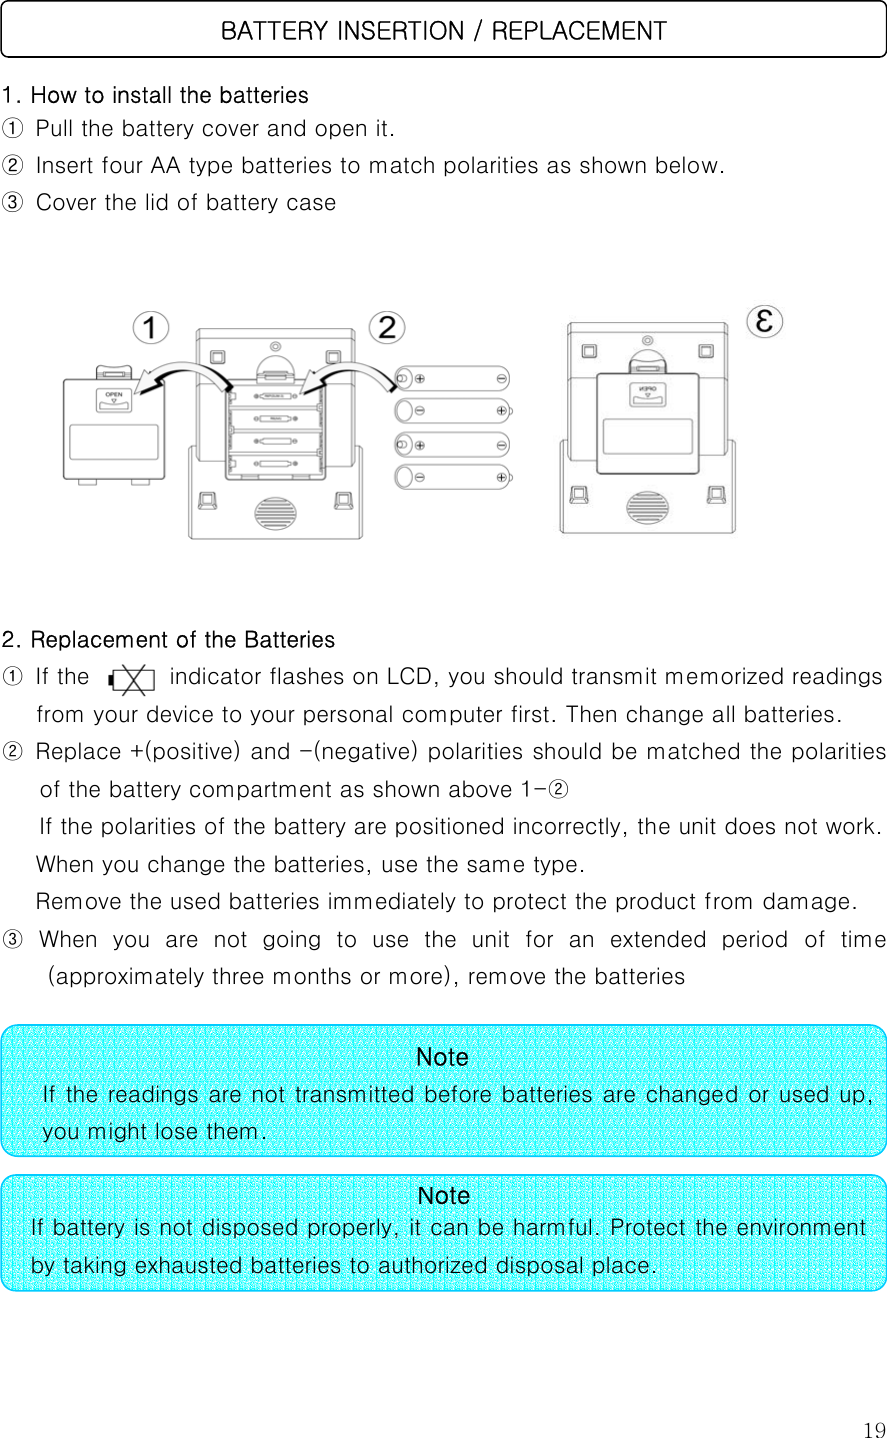  19  1. How to install the batteries ①  Pull the battery cover and open it. ② Insert four AA type batteries to match polarities as shown below. ③ Cover the lid of battery case        2. Replacement of the Batteries ① If the       indicator flashes on LCD, you should transmit memorized readings from your device to your personal computer first. Then change all batteries. ②  Replace +(positive) and -(negative) polarities should be matched the polarities of the battery compartment as shown above 1-②   If the polarities of the battery are positioned incorrectly, the unit does not work.       When you change the batteries, use the same type.   Remove the used batteries immediately to protect the product from damage. ③ When you are not going to use the unit for an extended period  of  time (approximately three months or more), remove the batteries           Note If the readings are not transmitted before batteries are changed or used up,you might lose them. NoteIf battery is not disposed properly, it can be harmful. Protect the environment by taking exhausted batteries to authorized disposal place.   BATTERY INSERTION / REPLACEMENT 